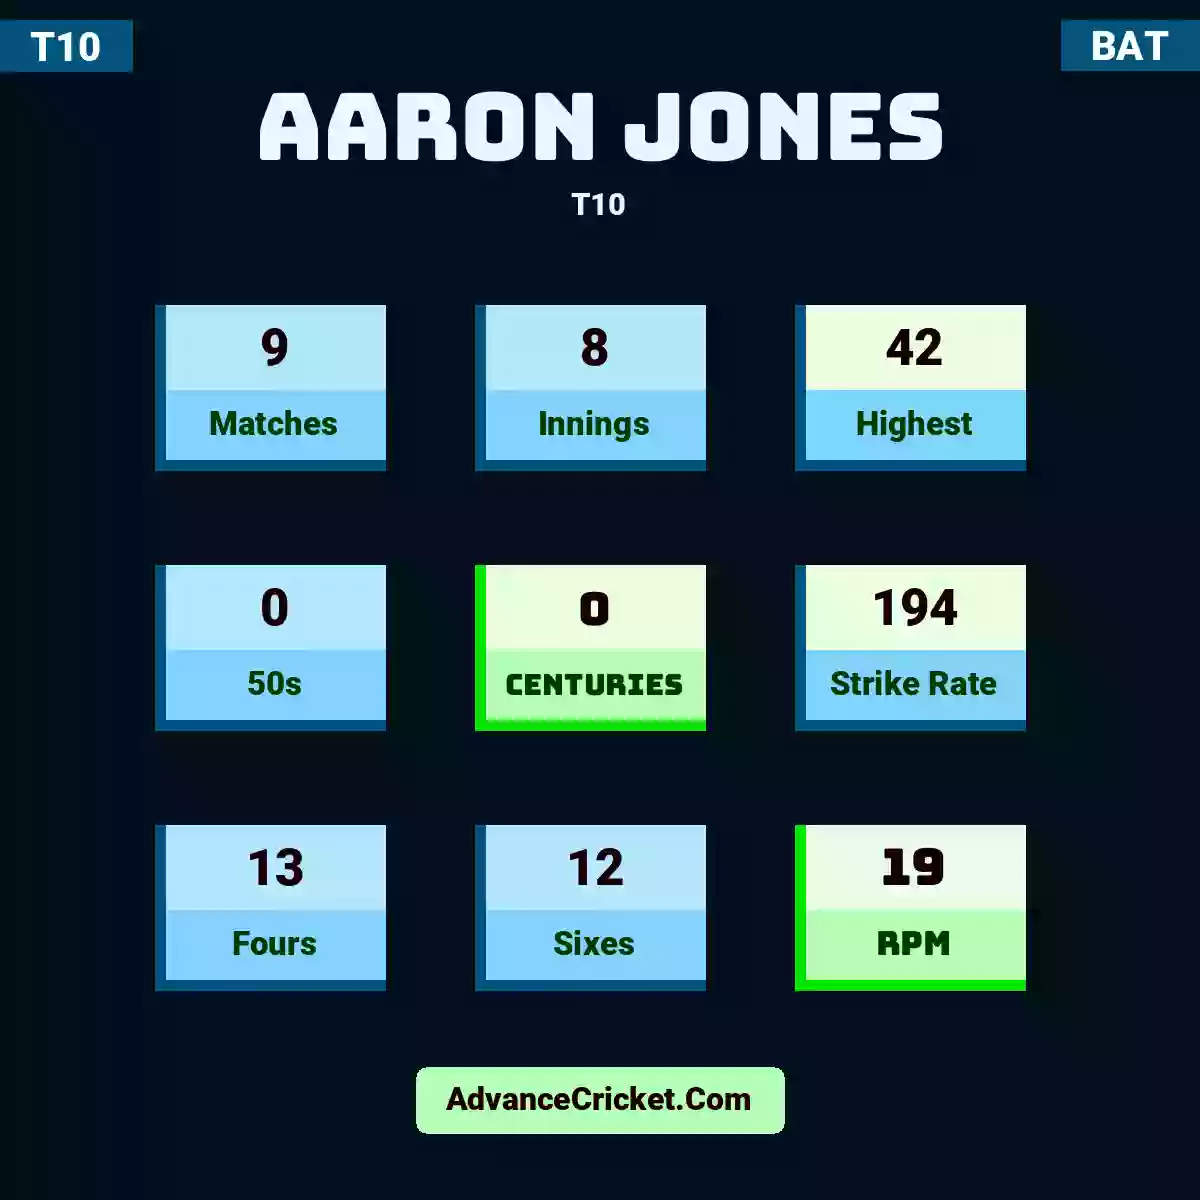 Aaron Jones T10 , Aaron Jones played 9 matches, scored 42 runs as highest, 0 half-centuries, and 0 centuries, with a strike rate of 194. A.Jones hit 13 fours and 12 sixes, with an RPM of 19.